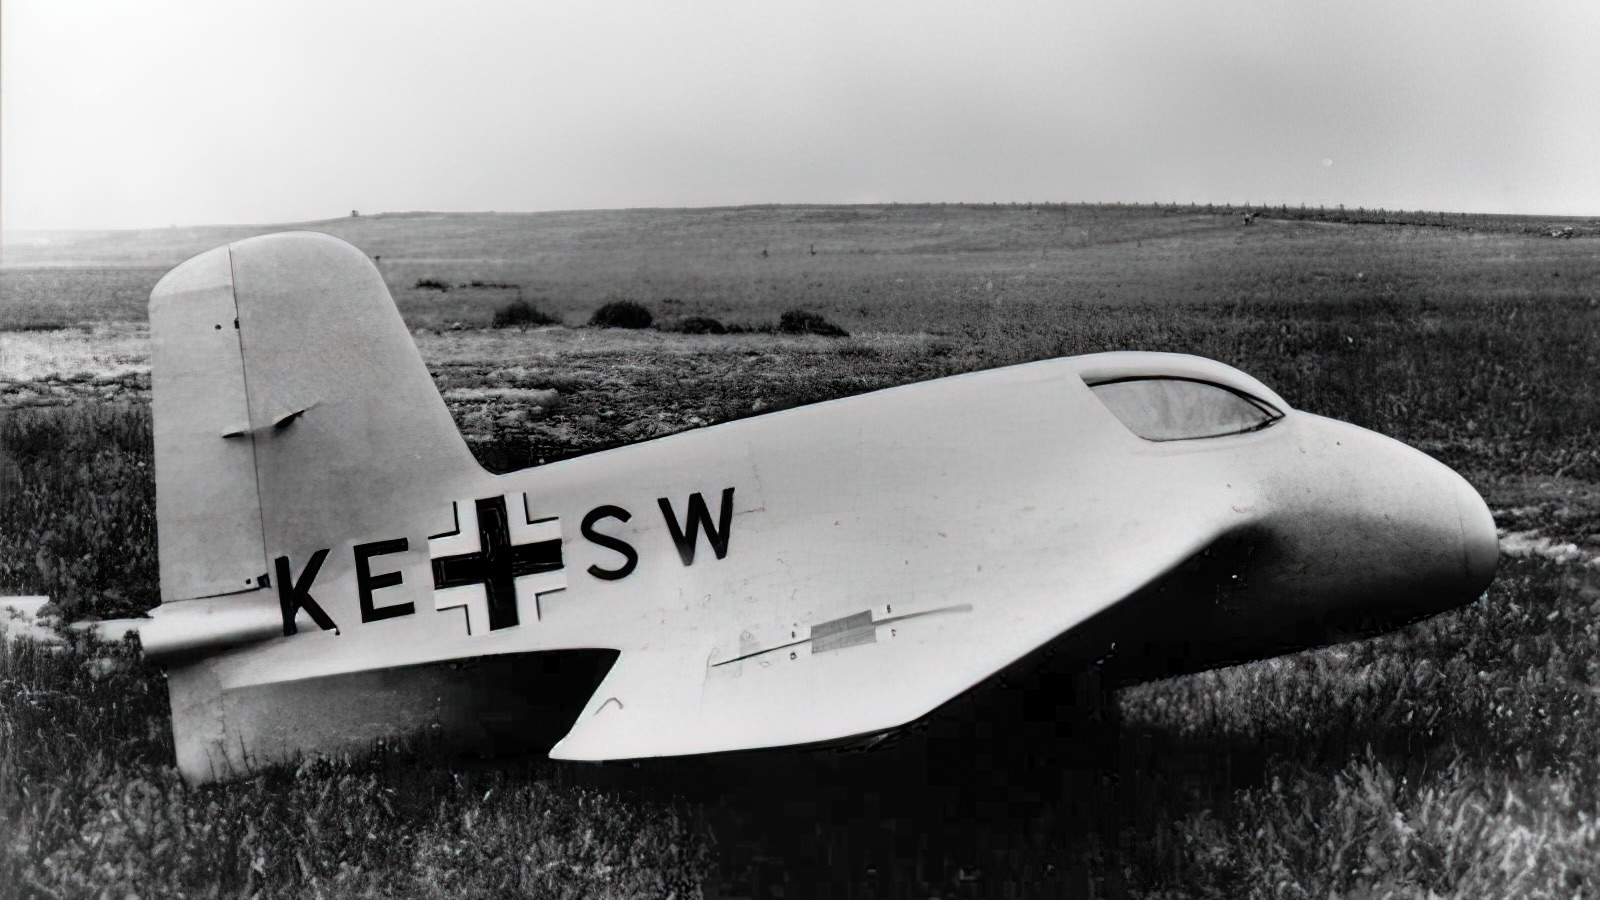 The Me 163A V4 (first prototype) in 1941. Bundesarchiv, Bild 146-1972-058-62 / CC-BY-SA 3.0